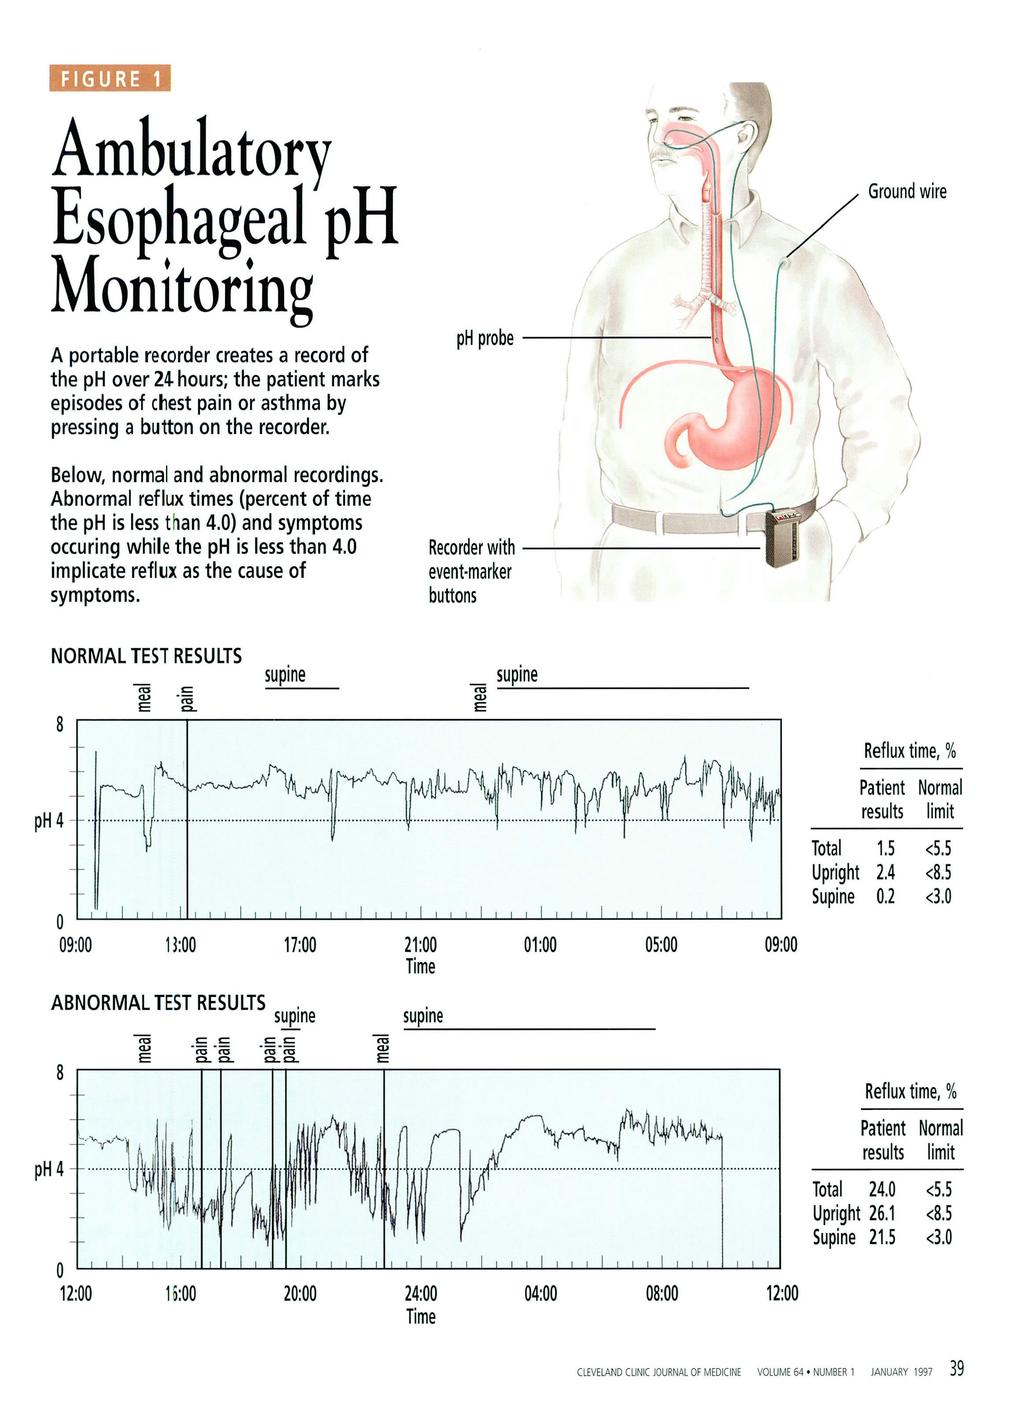 FIGURE 1 Ambulatory Esophageal ph Monitoring A portable recorder creates a record of the ph over 24 hours; the patient marks episodes of chest pain or asthma by pressing a button on the recorder.